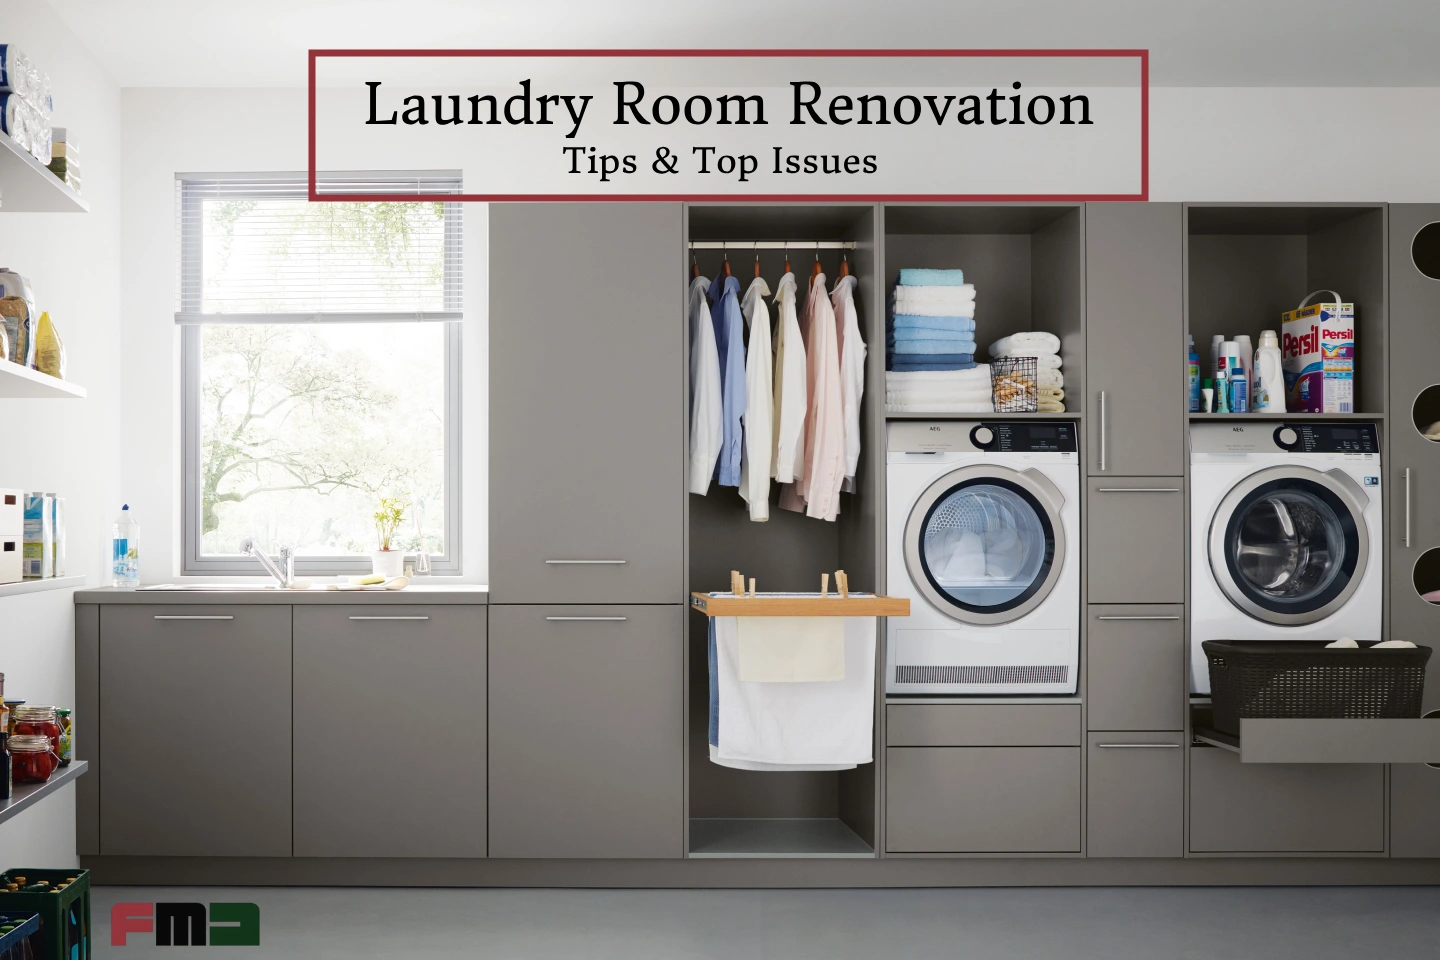 What to Consider in Laundry Room Renovation